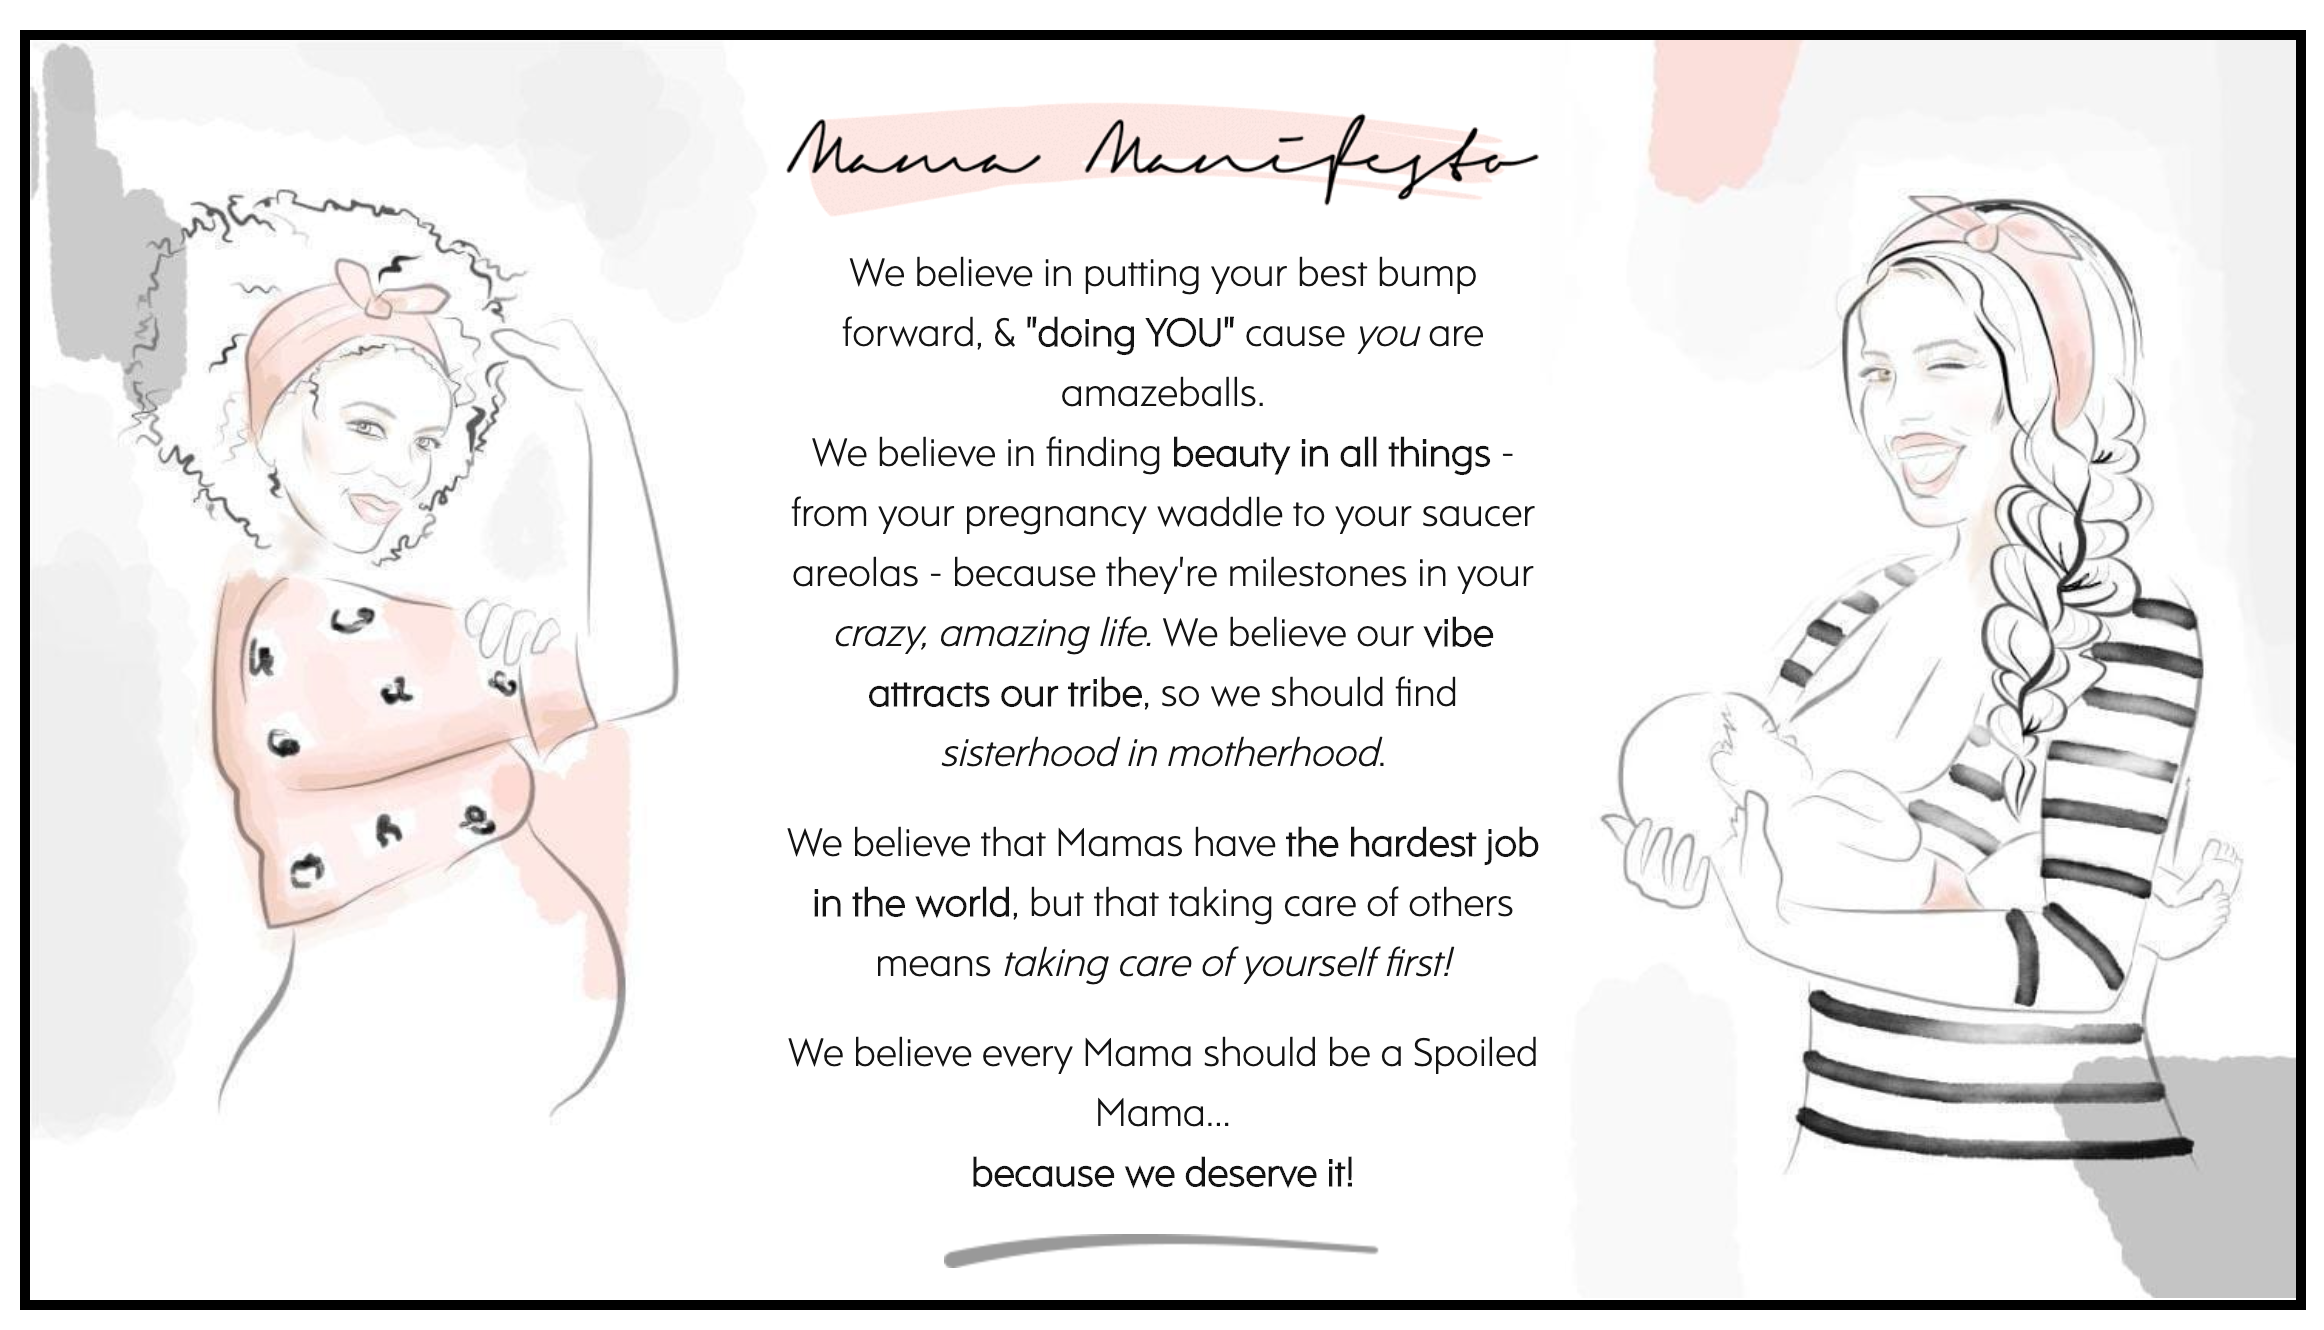 The Spoiled Mama Mission statement